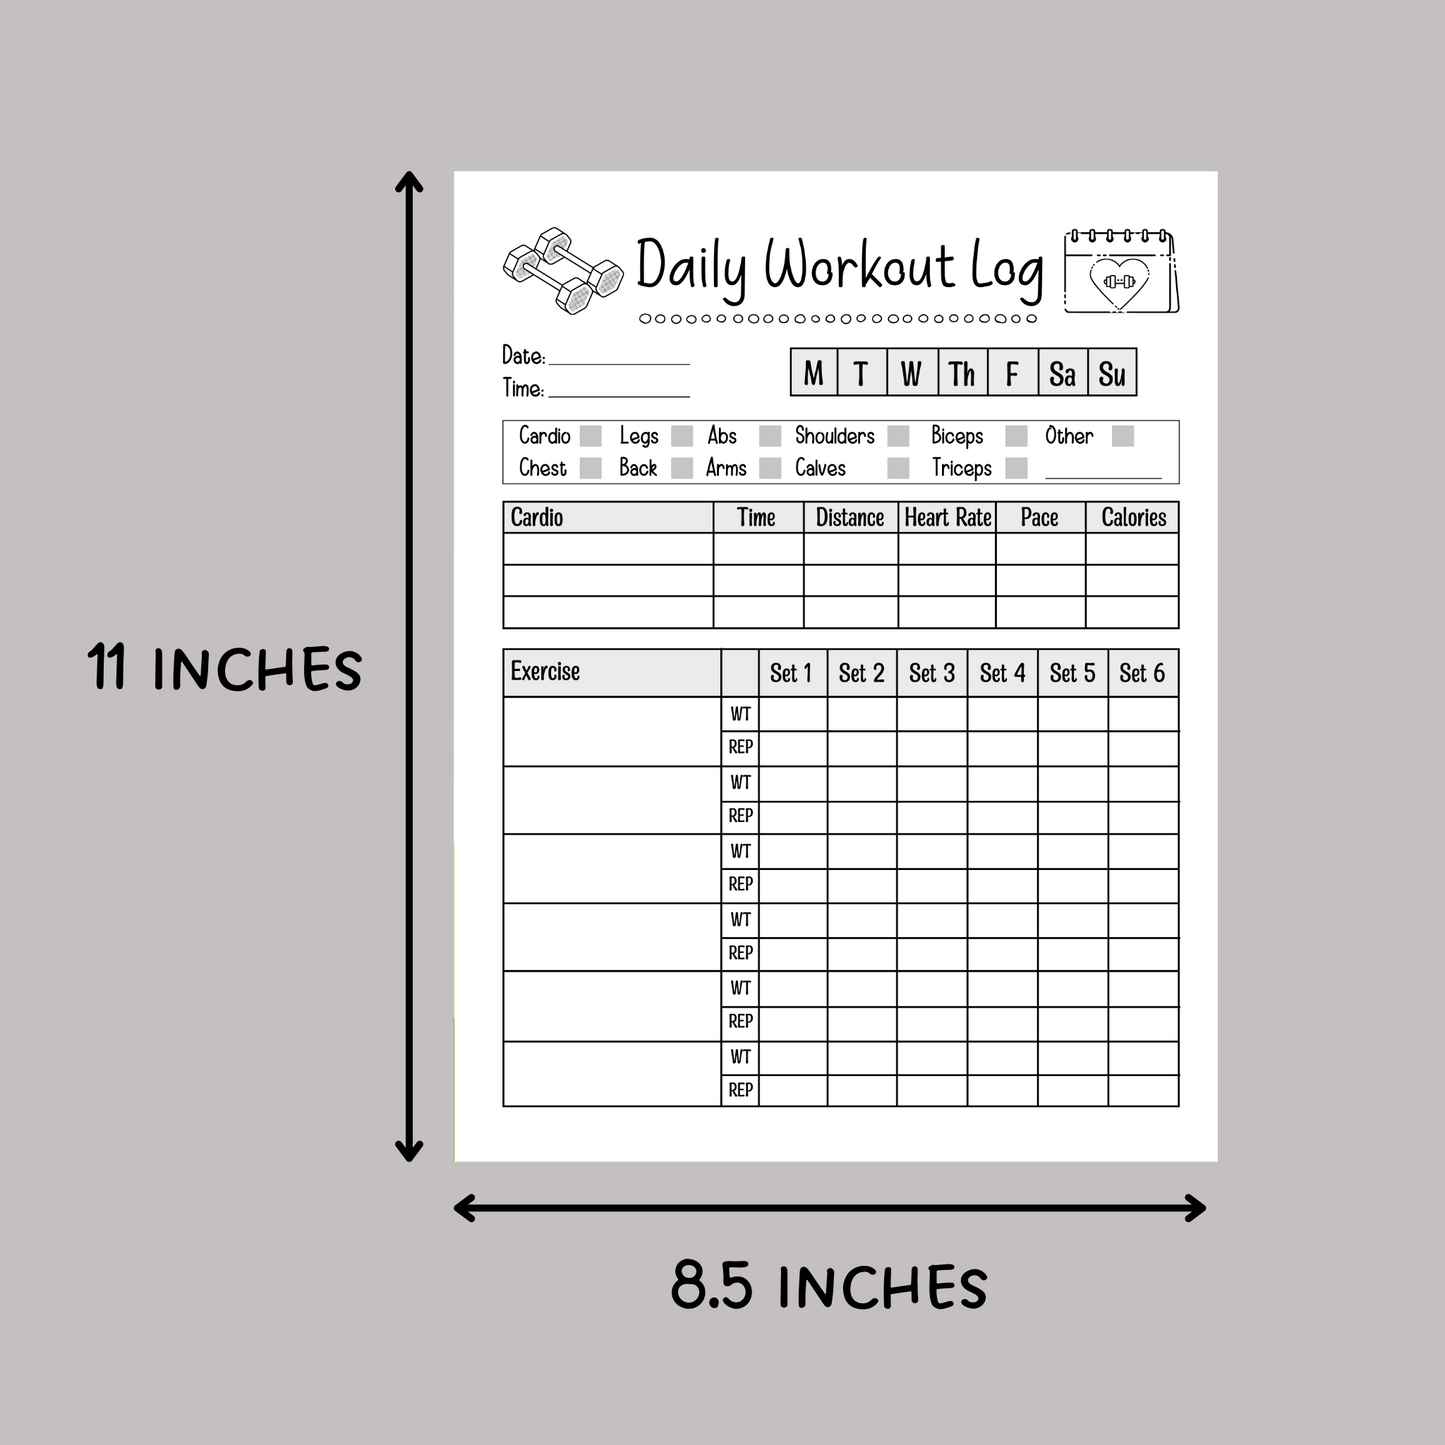 Daily Workout Log Printable Exercise Planner, Gym Training Tracker